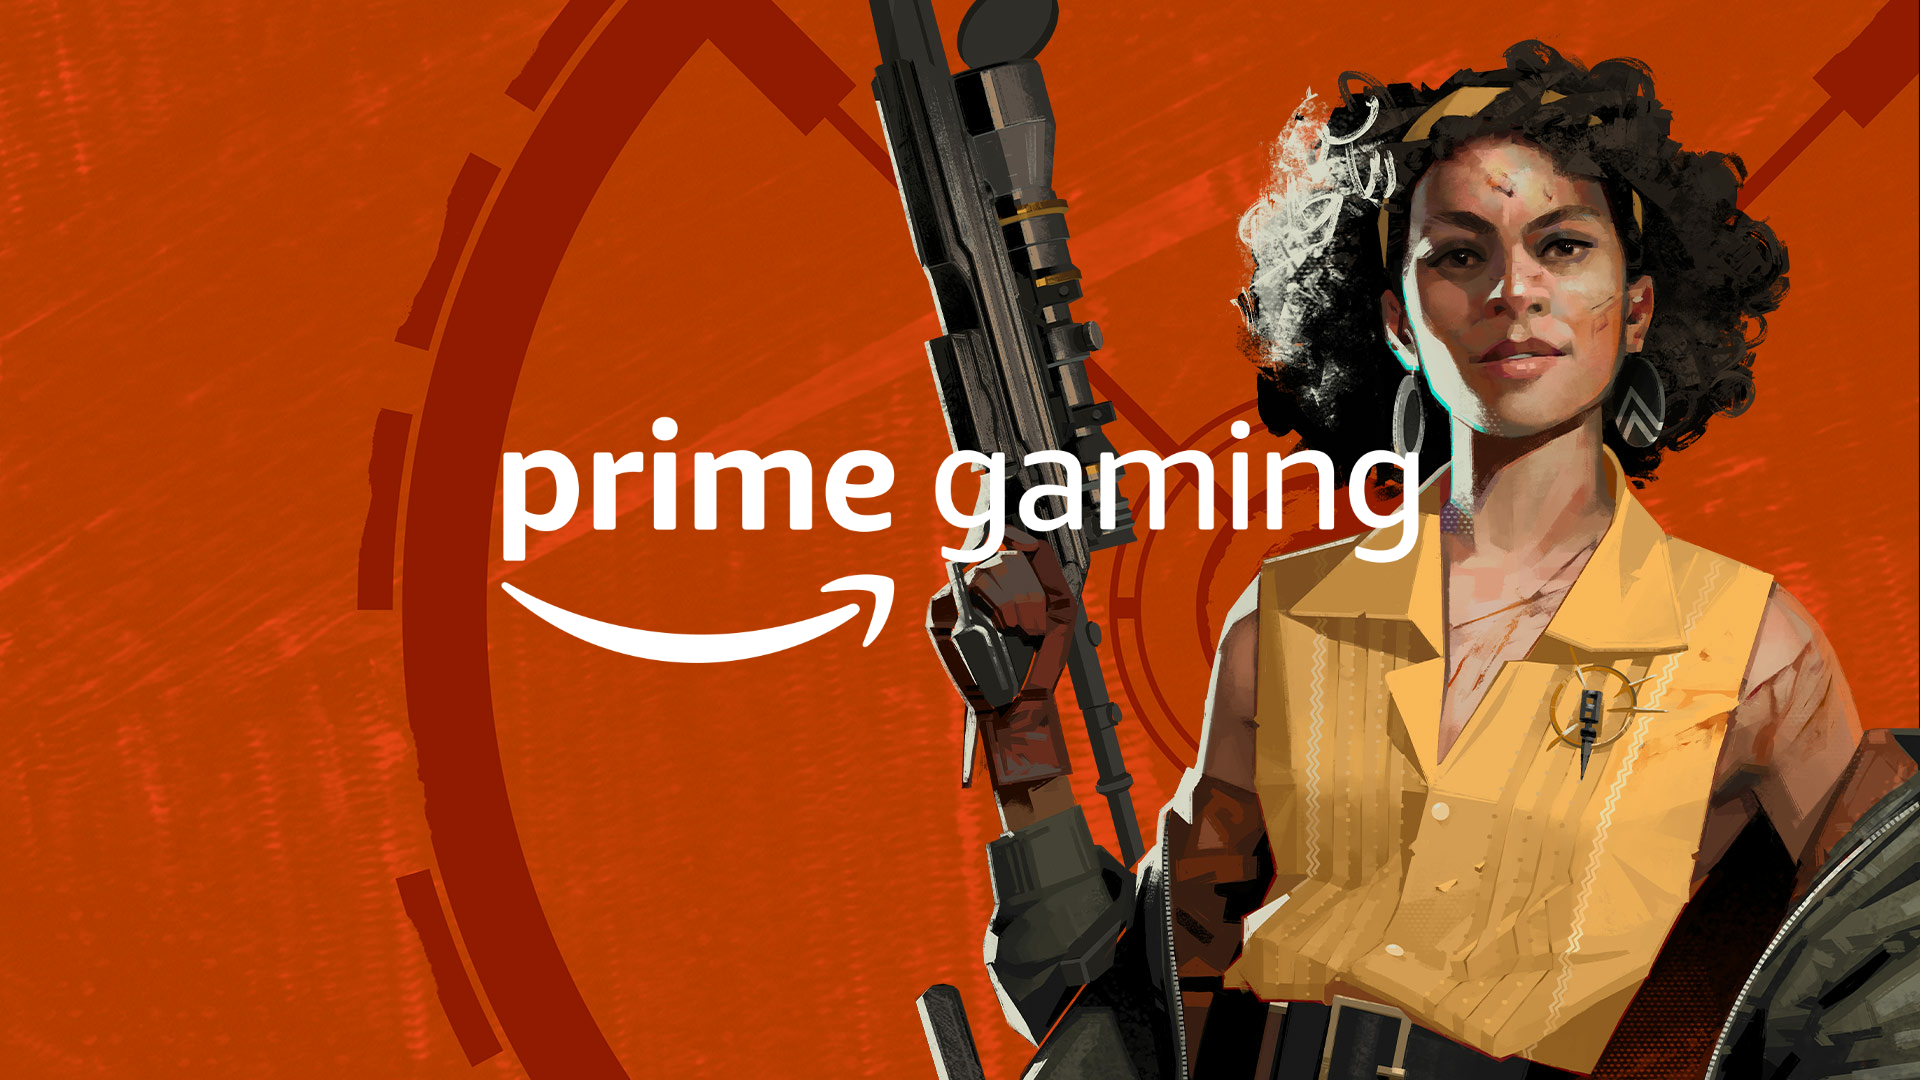 Prime Gaming December 2023 - what games are we getting?